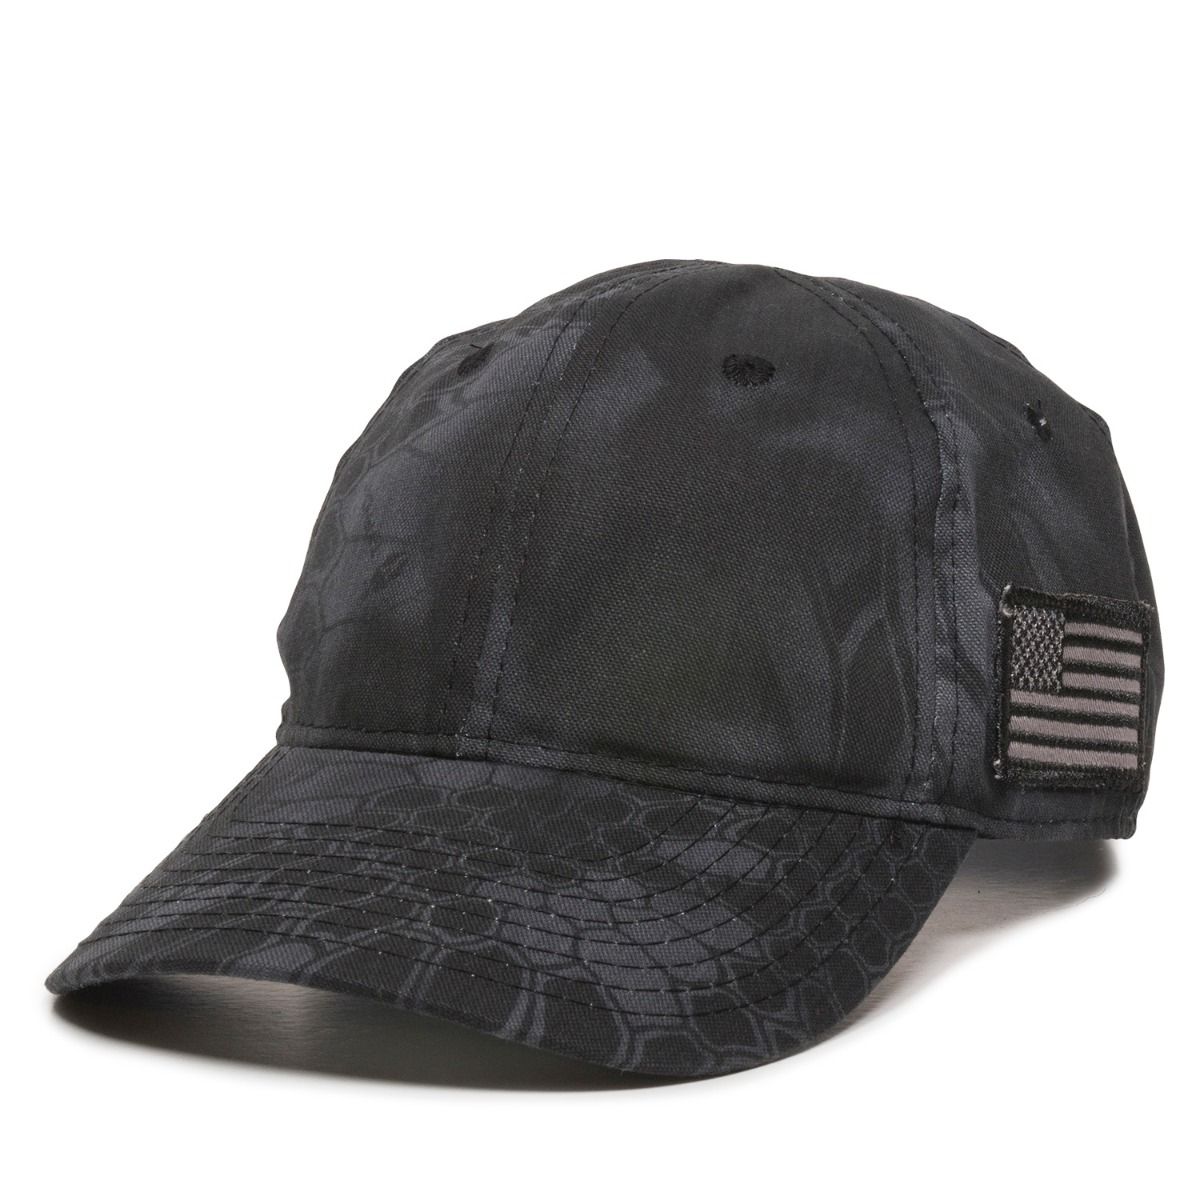 7th Special Forces Group Subdued Crossed Arrows Hat